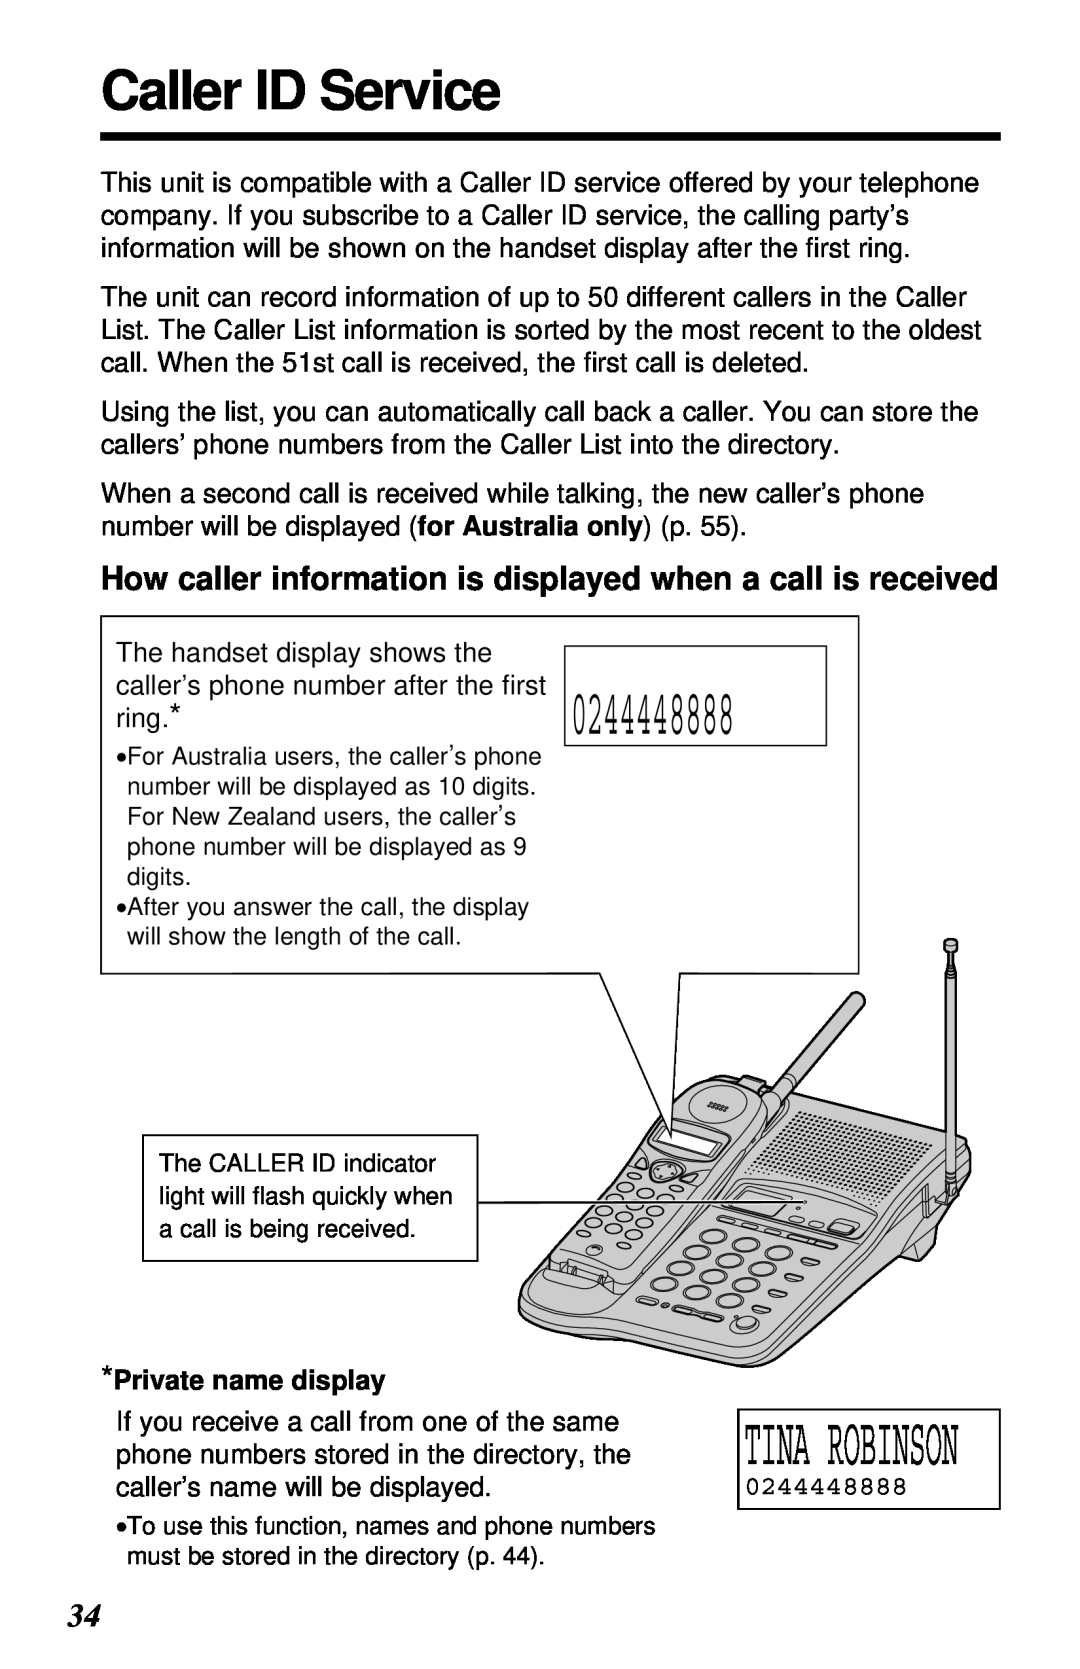 Panasonic KX-TC1230ALW, KX-TC1230NZW Caller ID Service, How caller information is displayed when a call is received 